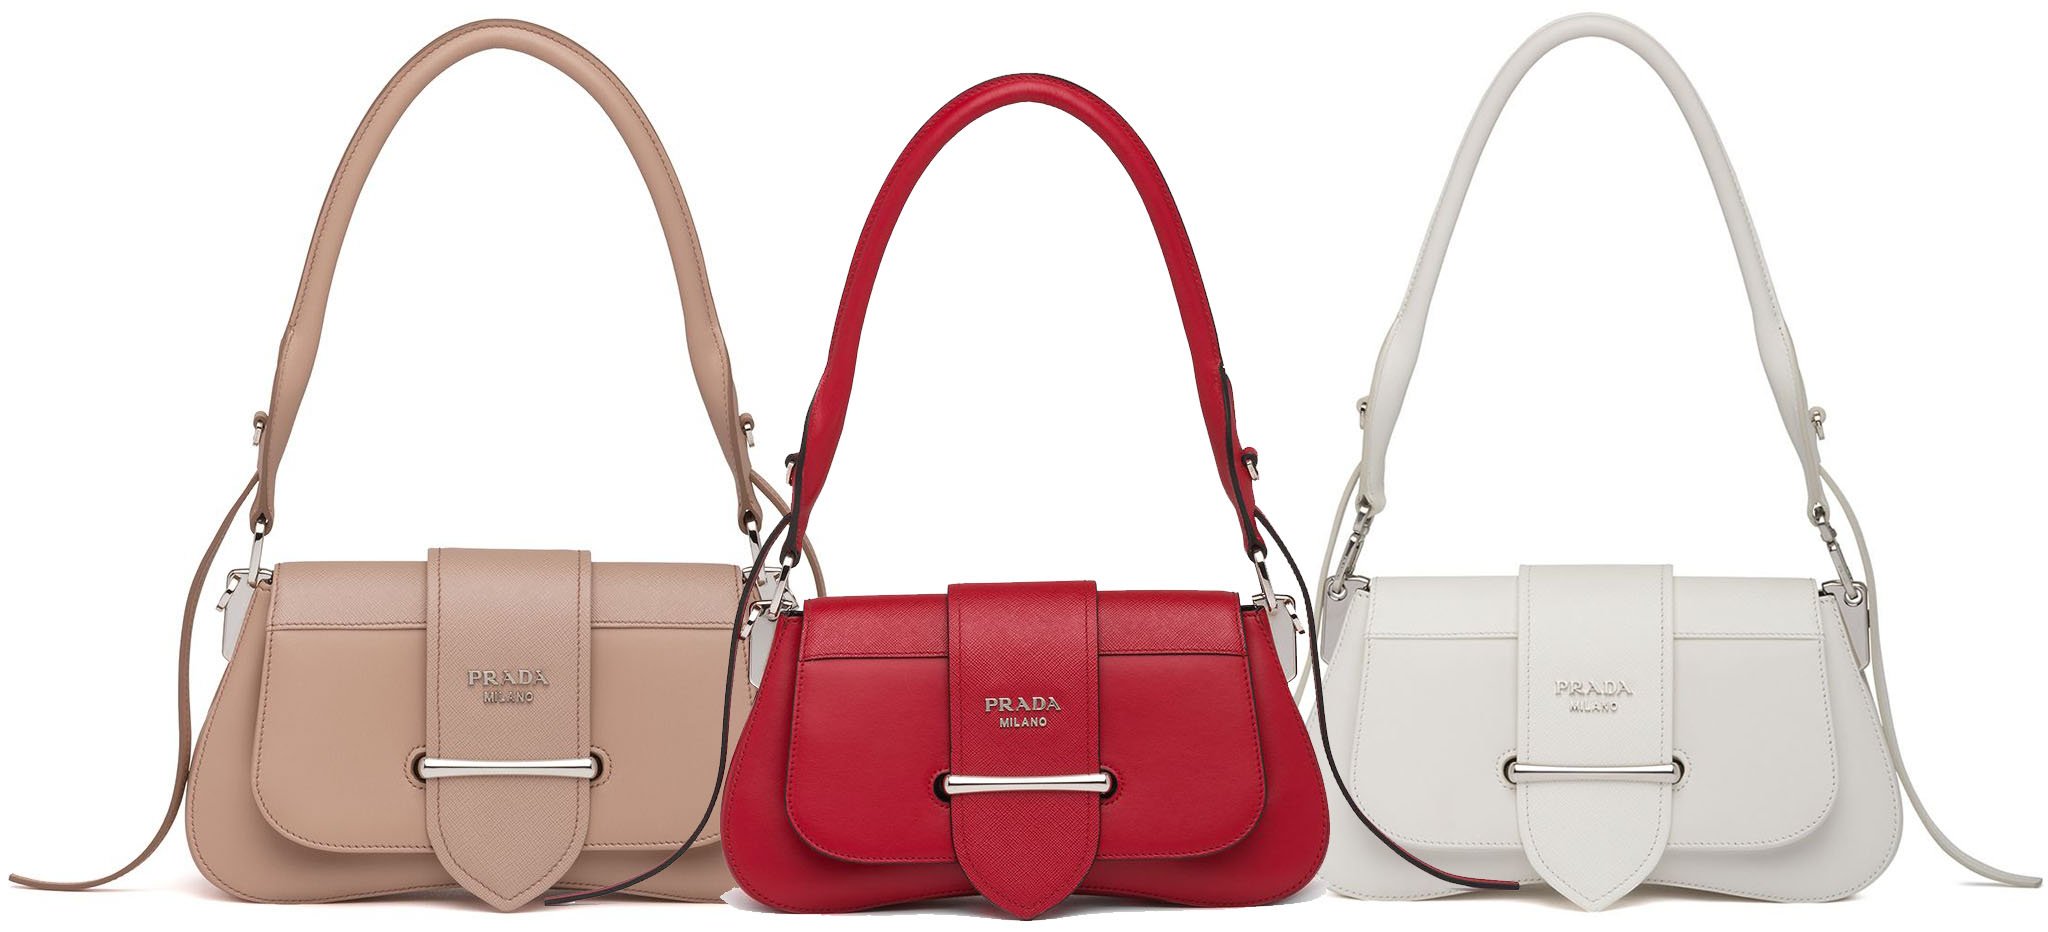 The Prada Sidonie: A stylish answer to classic elegance, featuring a unique saddle silhouette